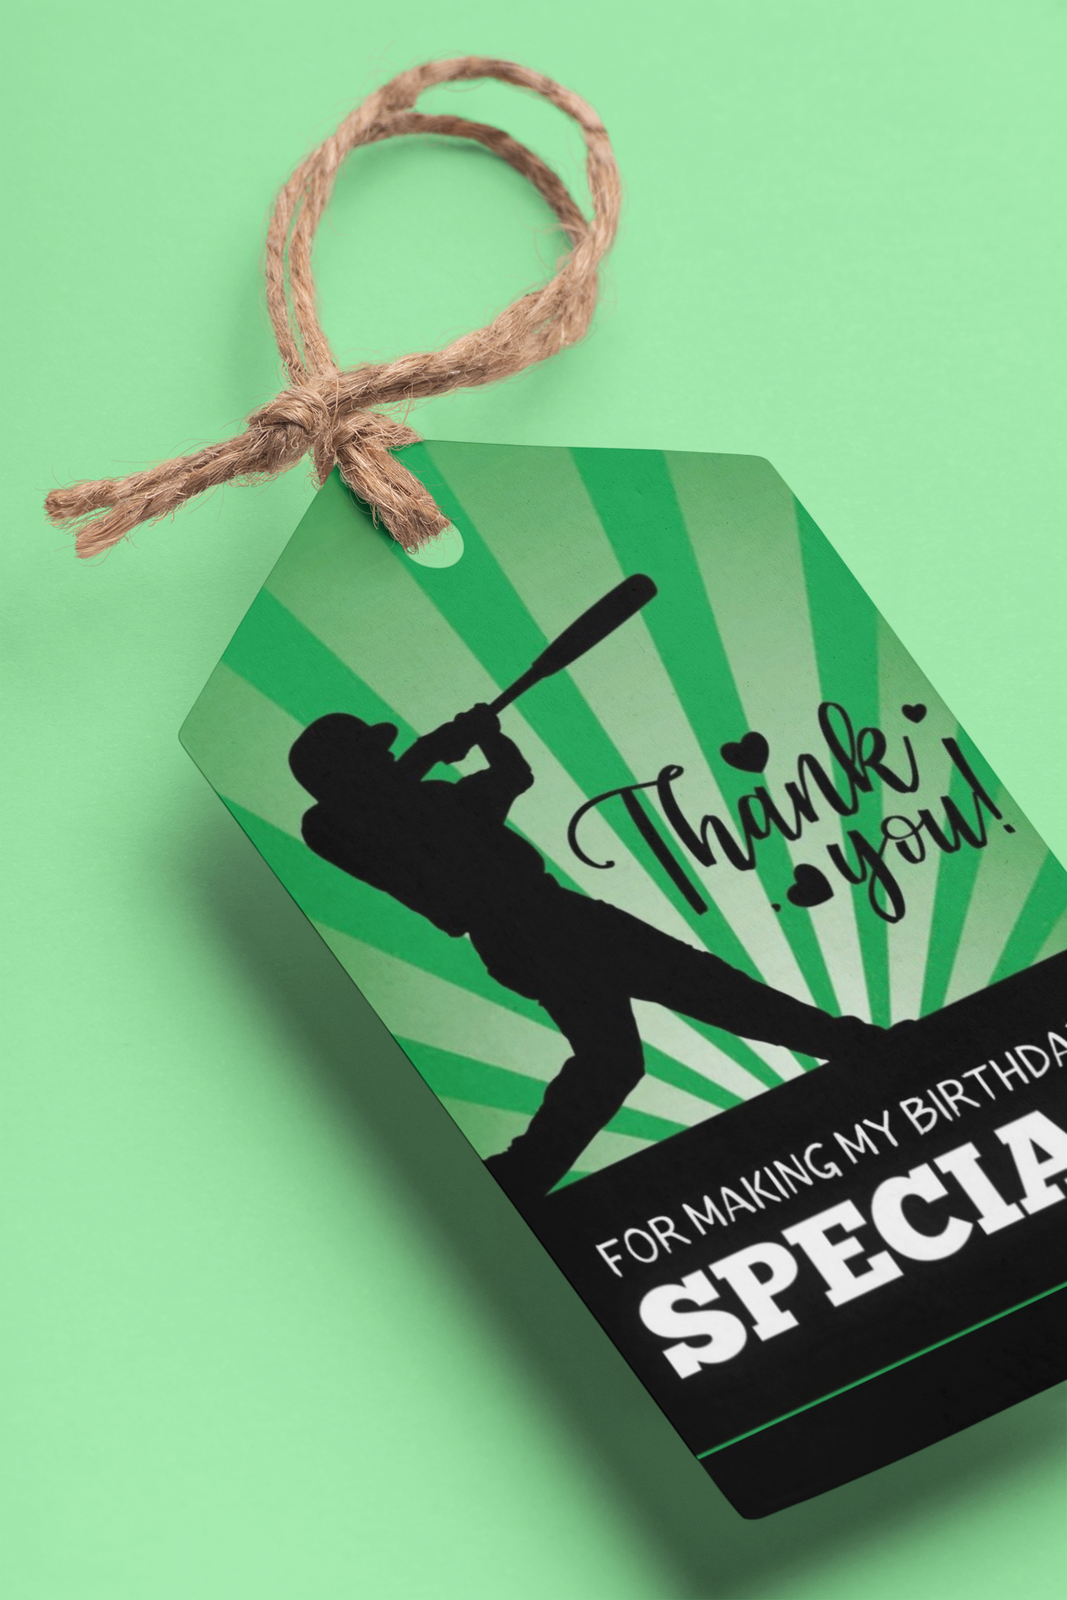 Baseball Theme Birthday Favour Tags (2 x 3.5 inches/250 GSM Cardstock/Black, White, Green & Light Green/30Pcs)